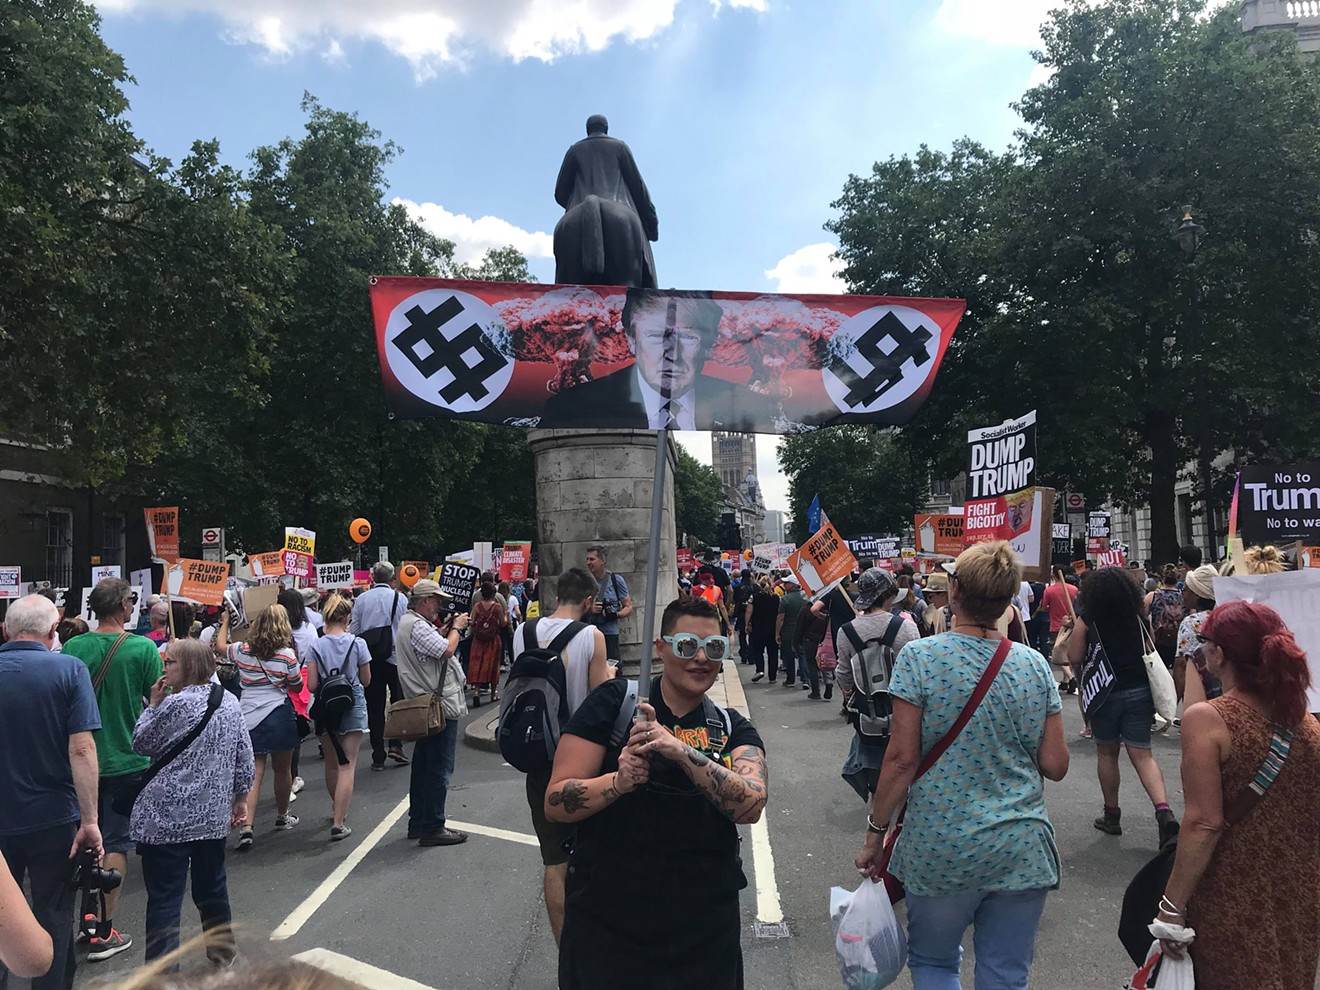 Carey Methley carries the anti-Trump flag in London on Friday, July 13.